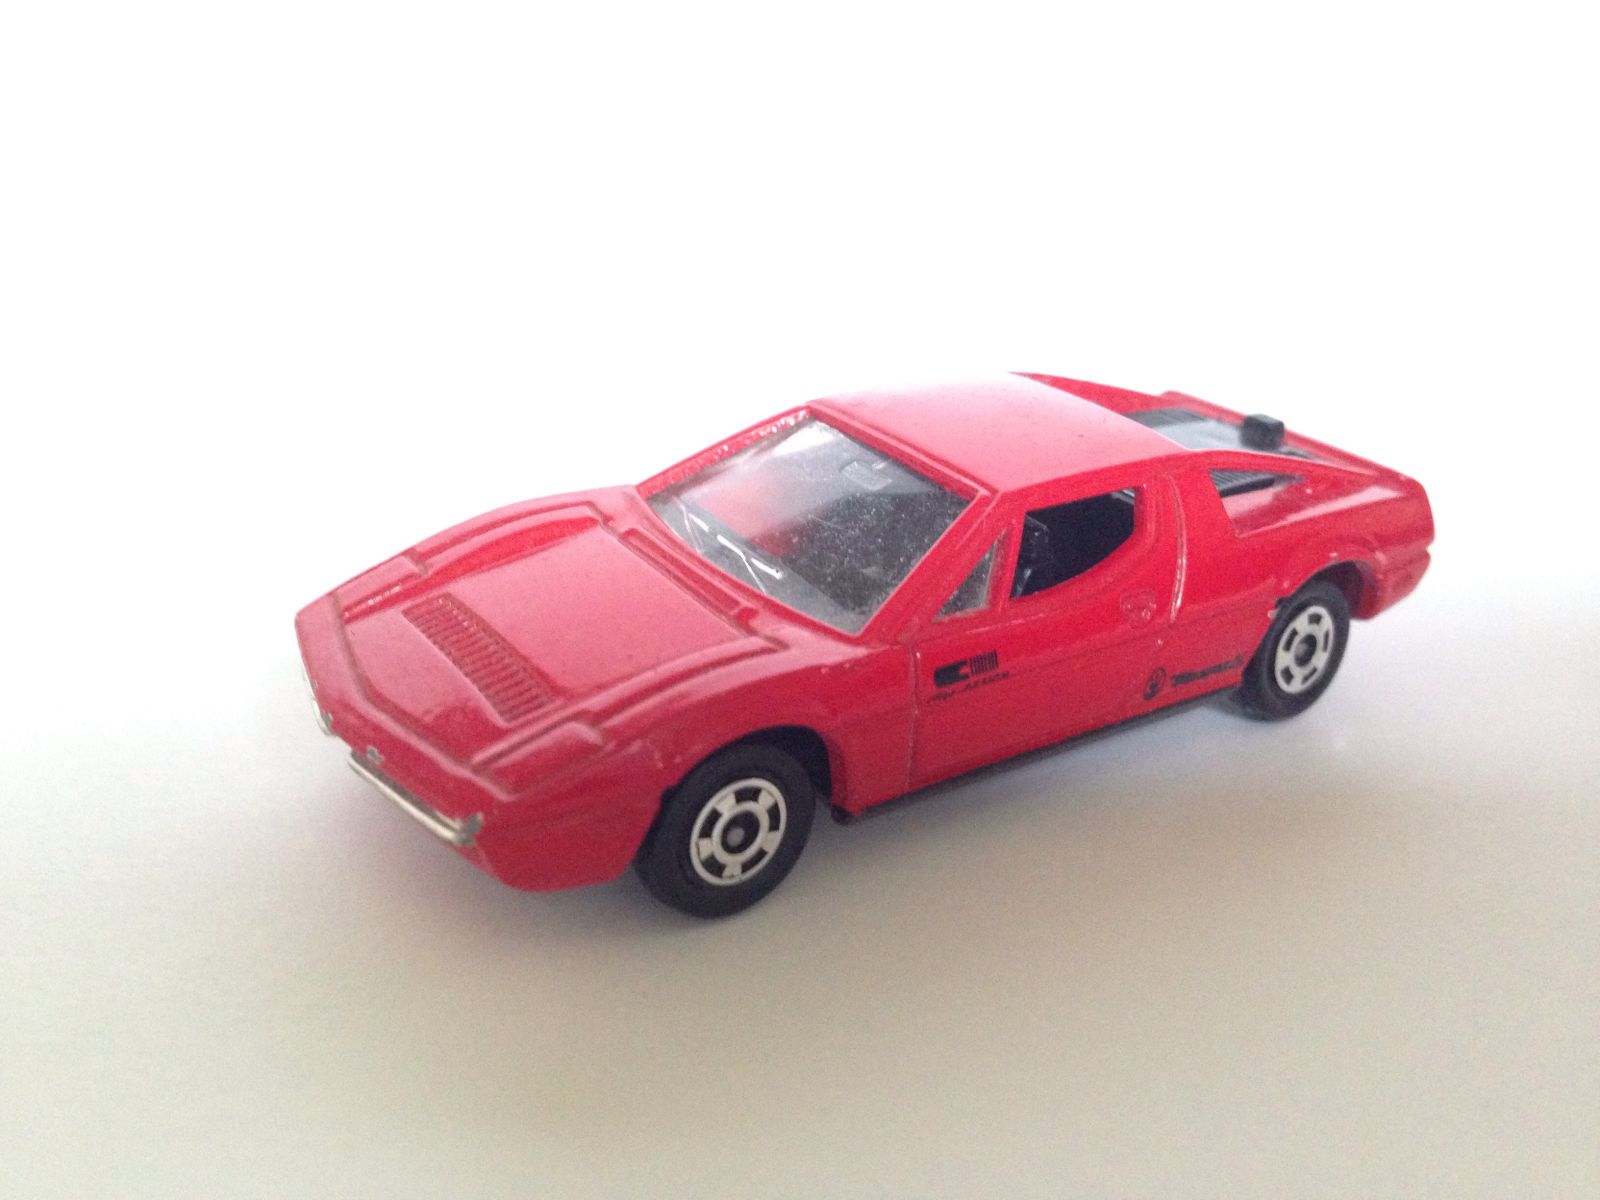 Illustration for article titled Tomica Tuesday: Maserati Merak SS